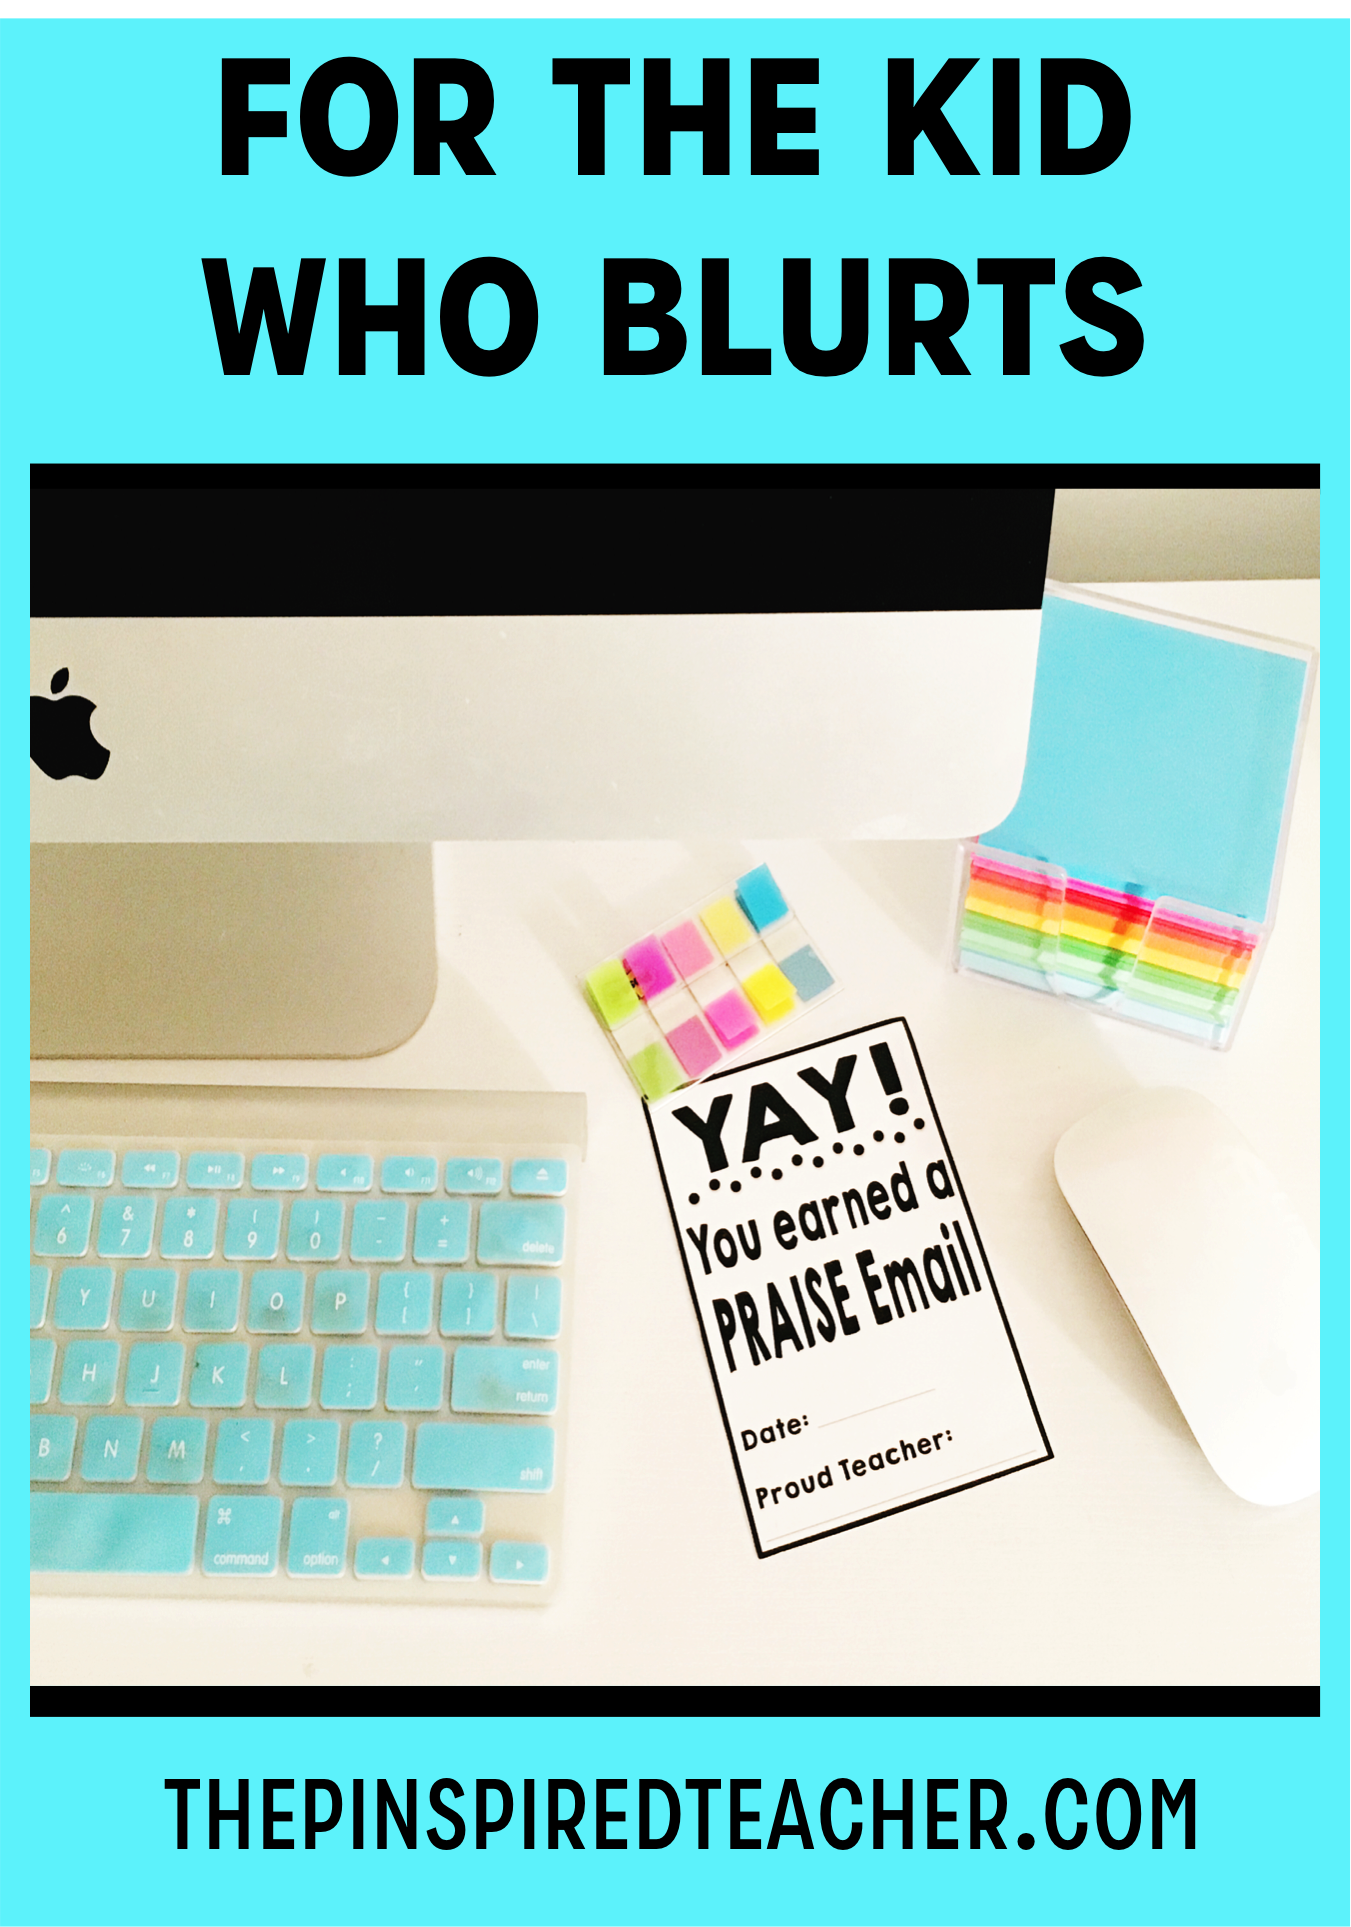 Parent Communication is key even if you send praise emails...that's something. These and more classroom management strategies for the kid who blurts by the pinspired teacher